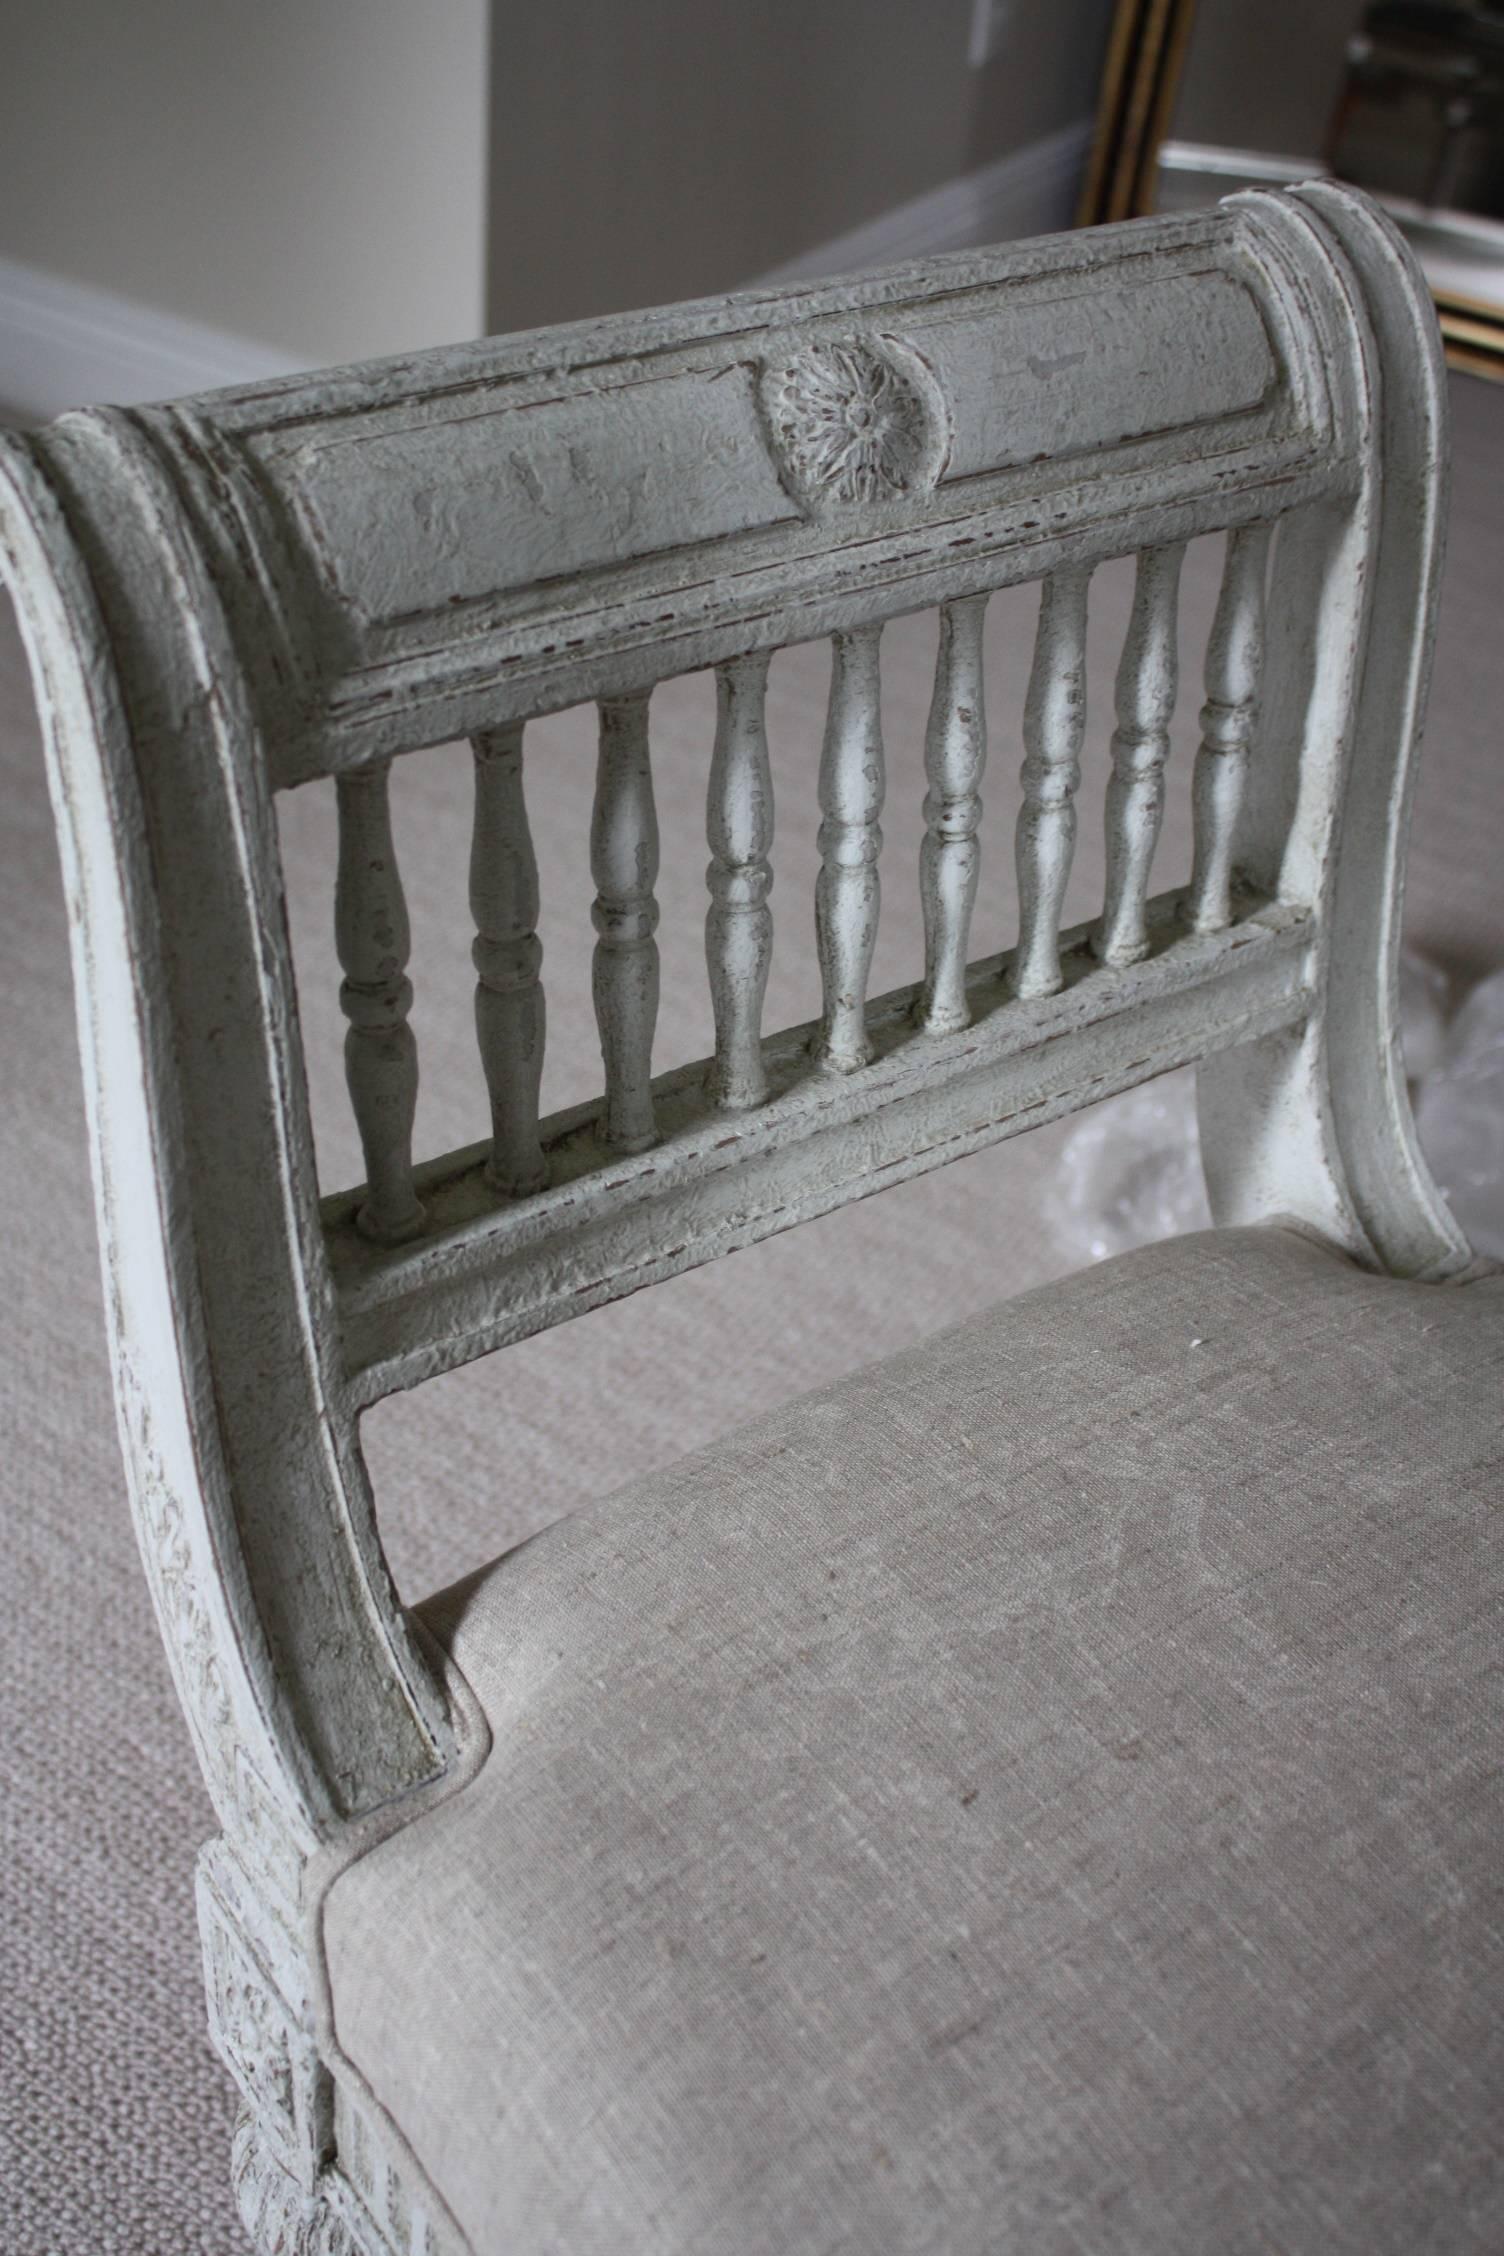 Crafted in France, circa 1880, the banquette features a curved back with spinals, detailed fluted carvings around the apron and tapered legs. The piece has been reupholstered with a gray linen fabric. Perfect addition to the foot of your bed.